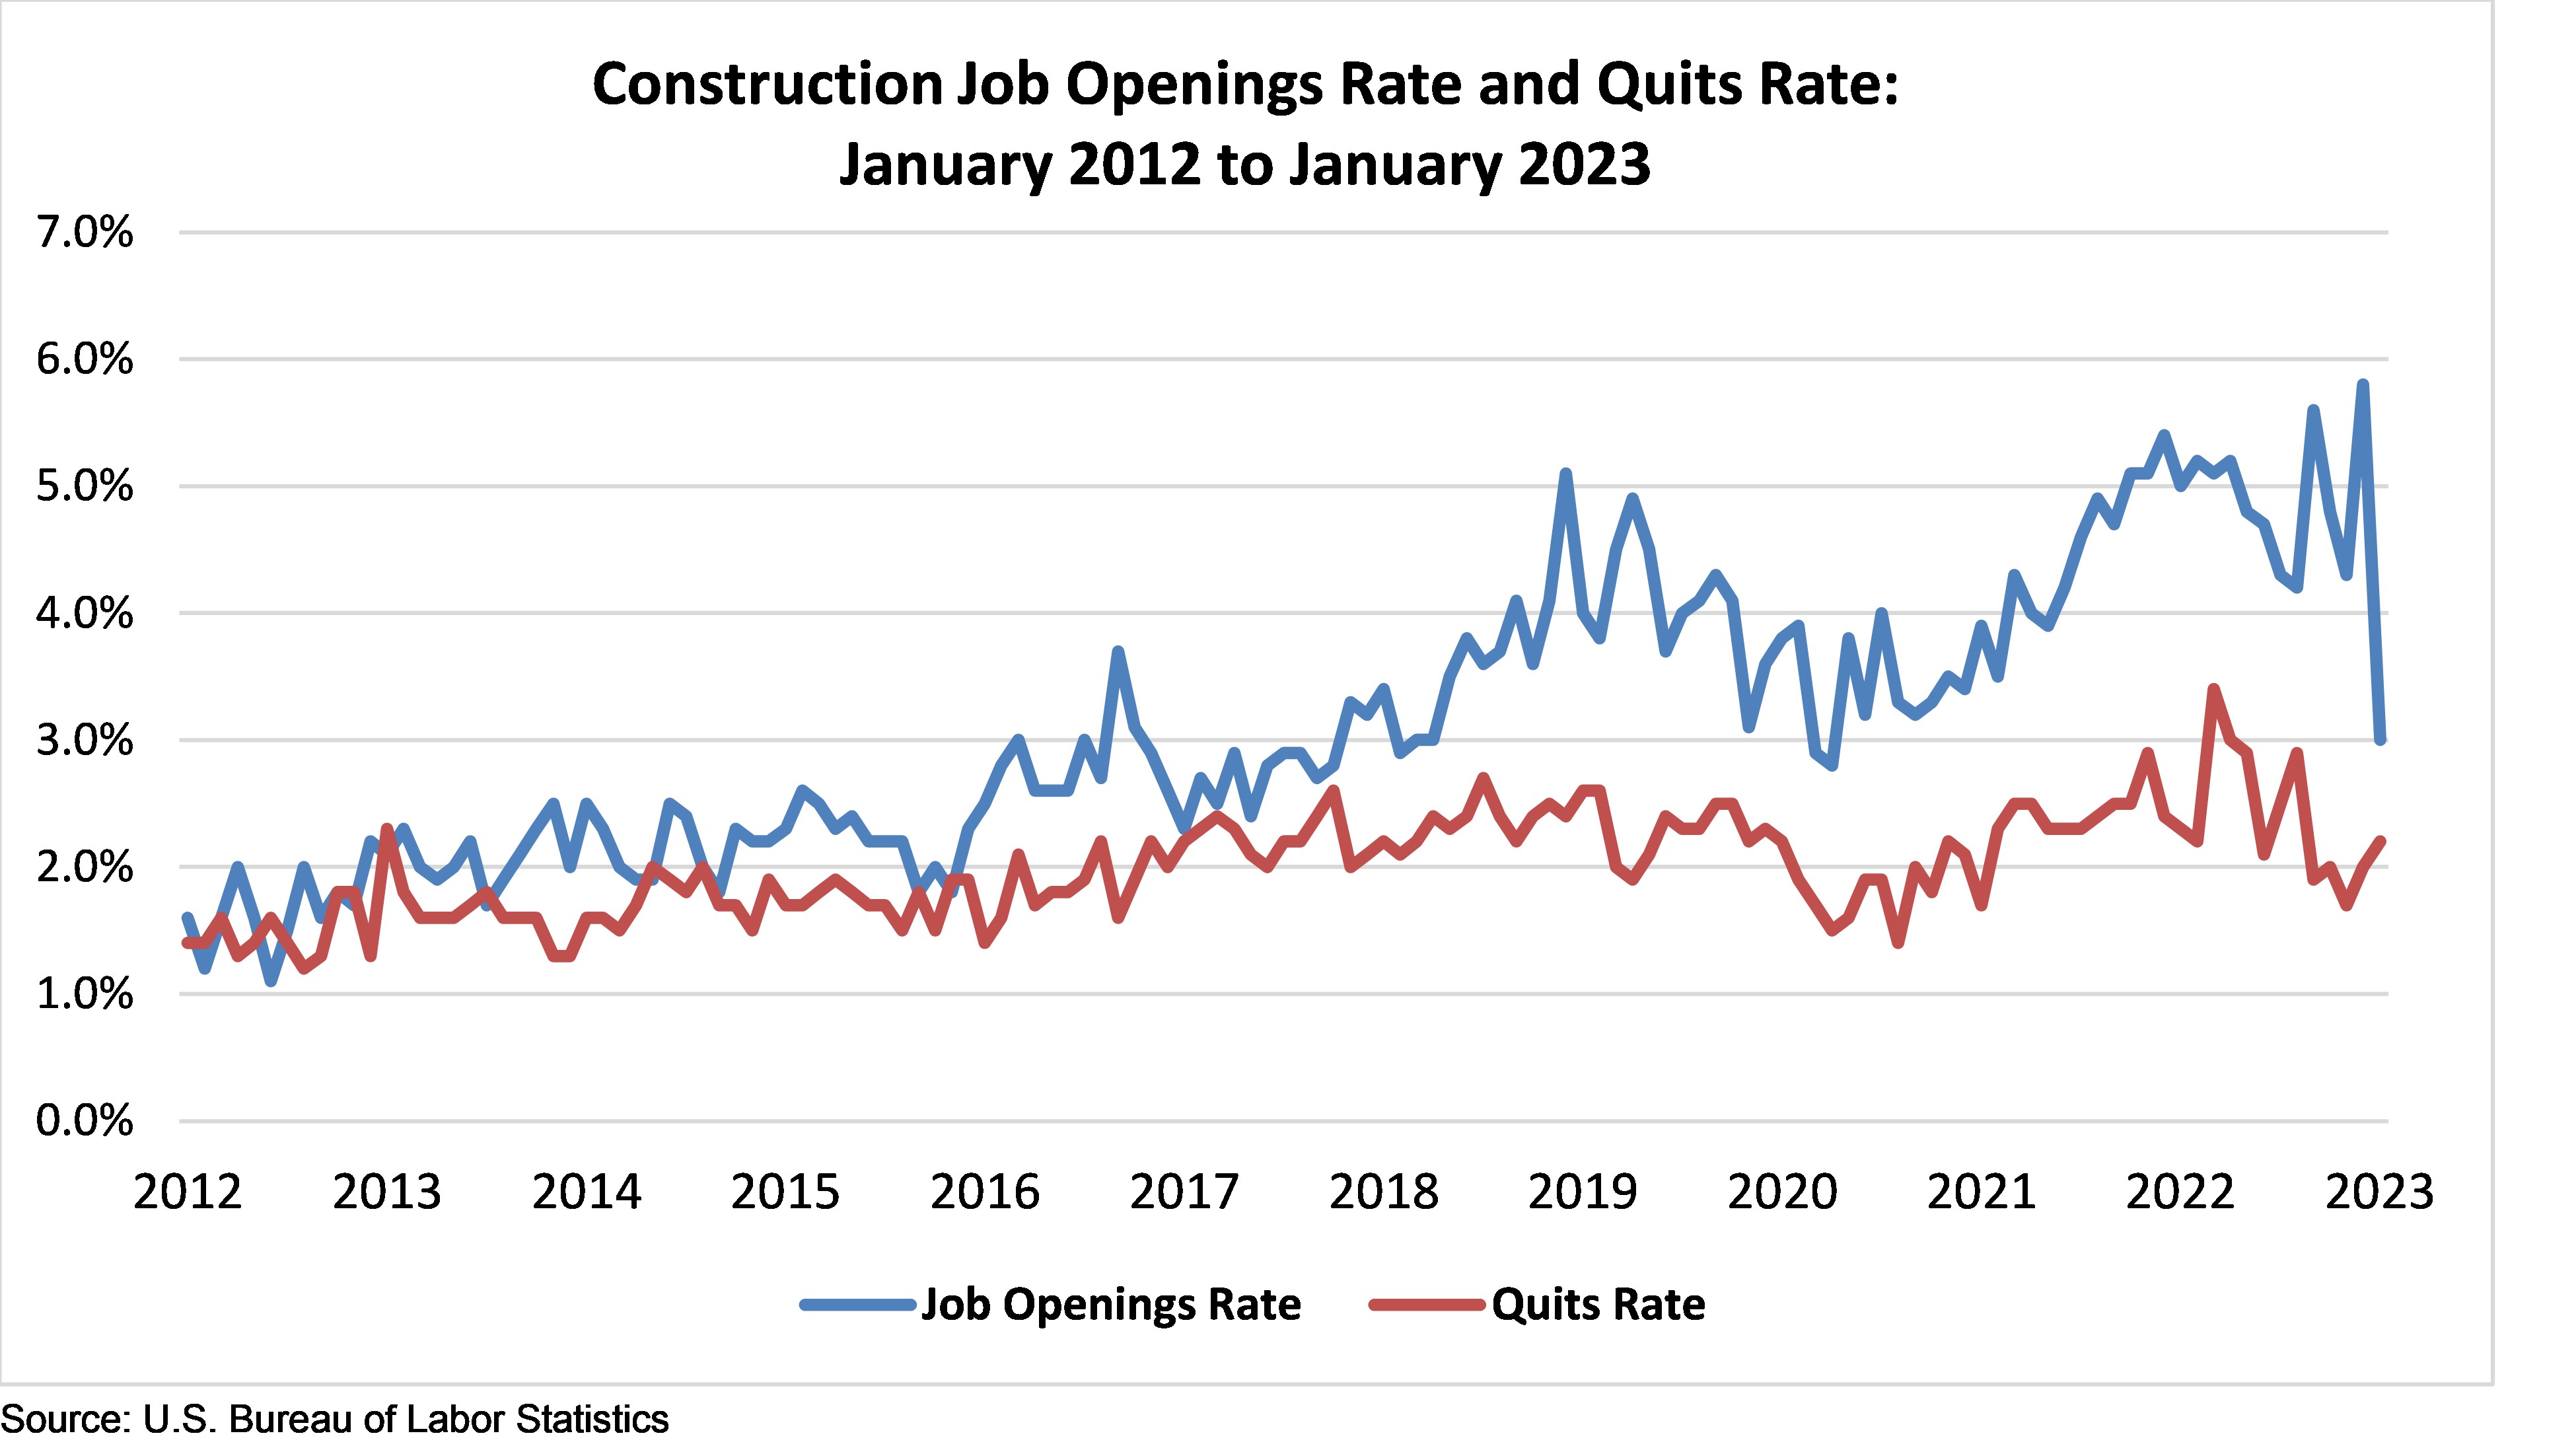 ABC: Construction Job Openings Rate and Quits Rate: January 2012 to January 2023